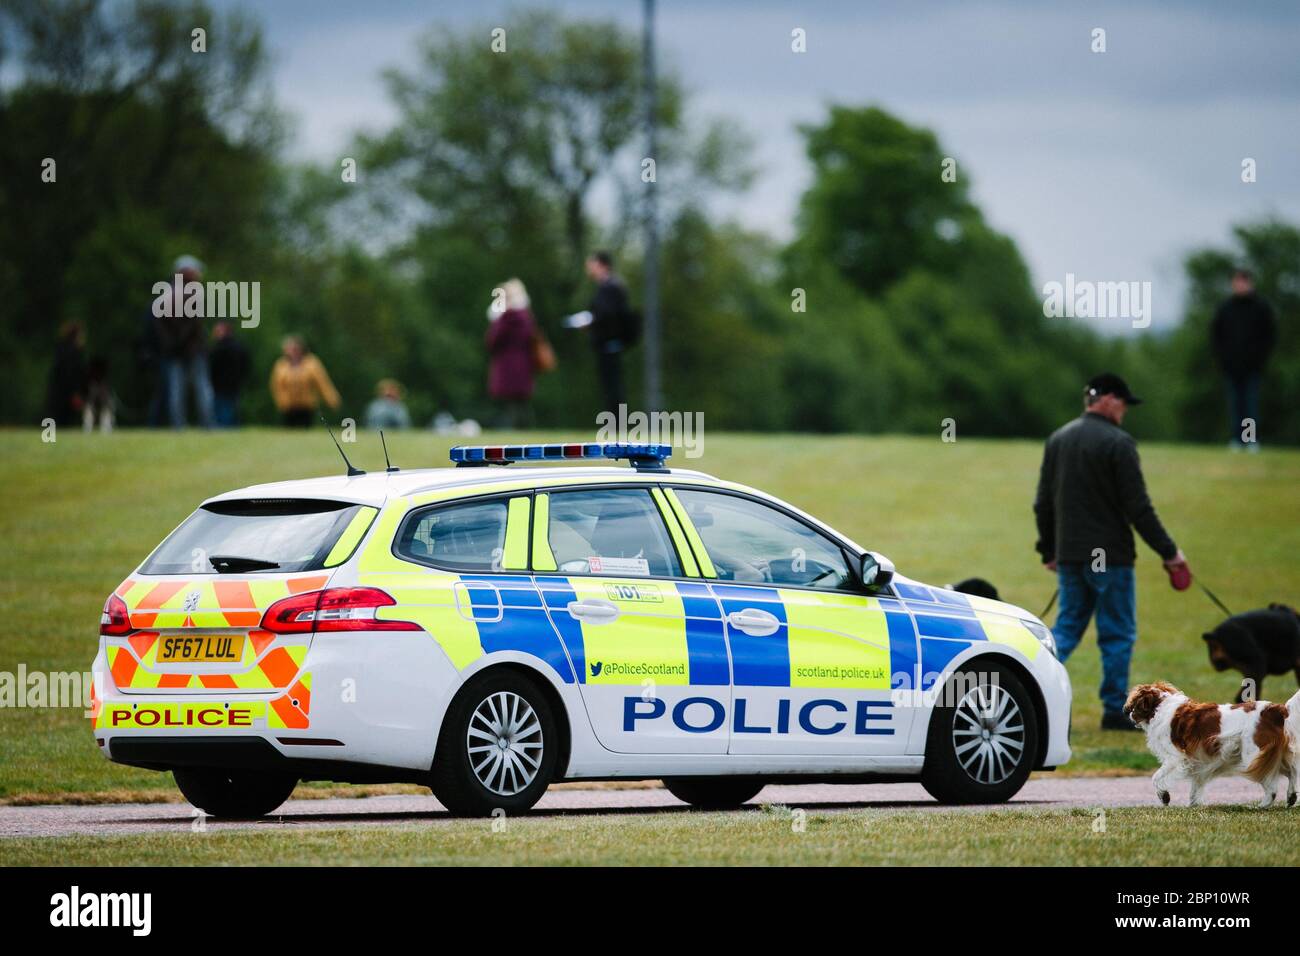 Police car on patrol in Glasgow Green, during the Coronavirus pandemic lock down, as people take their daily exercise. Stock Photo